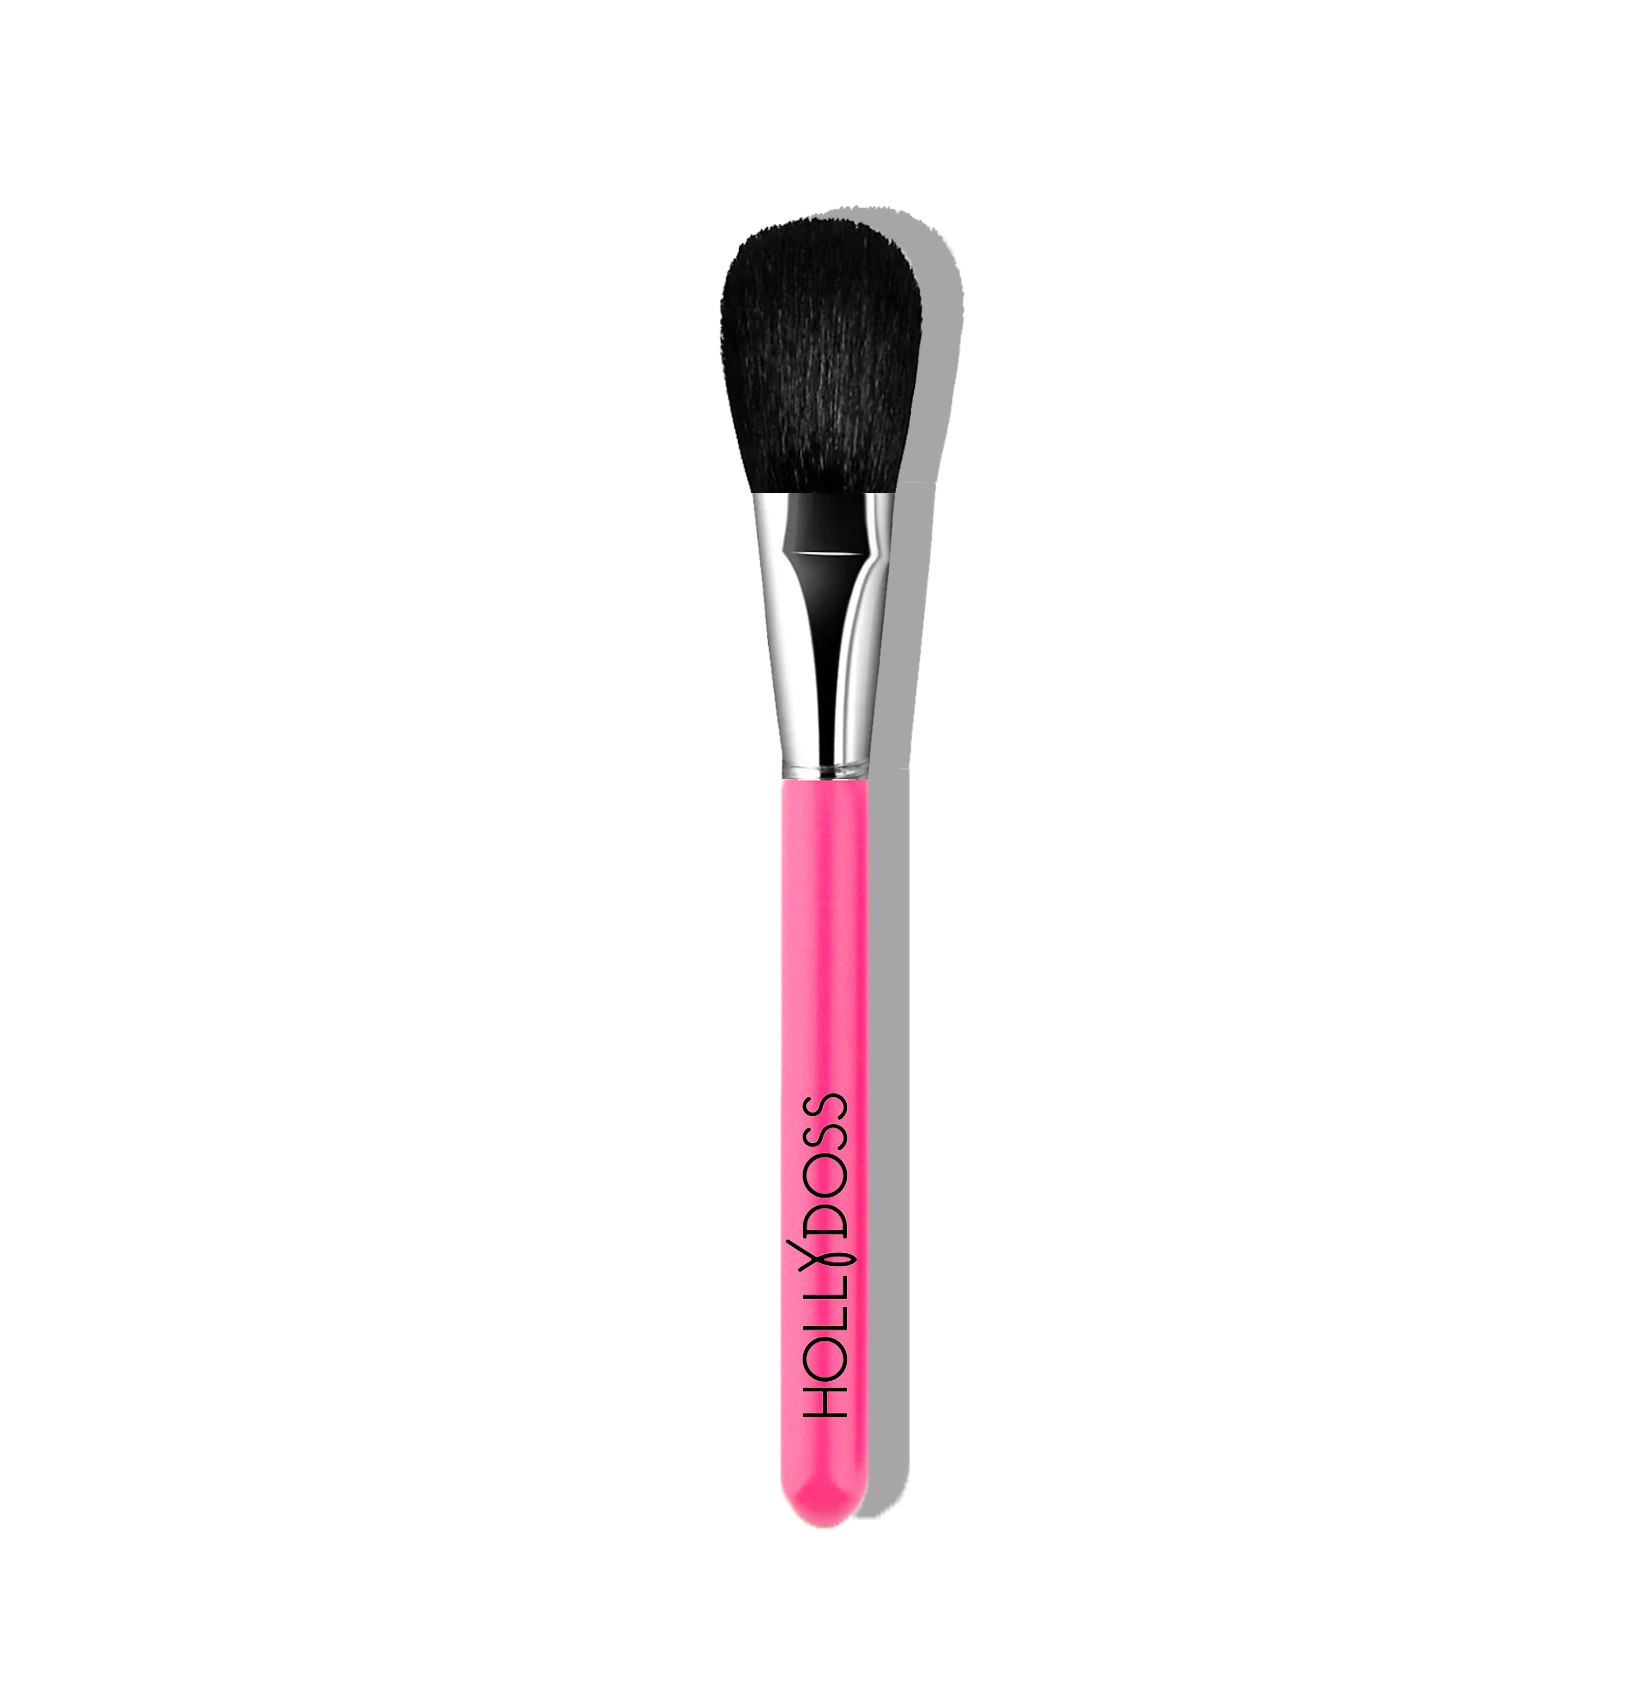 Sheer Shadow Brush - #4 - Holly Doss Official